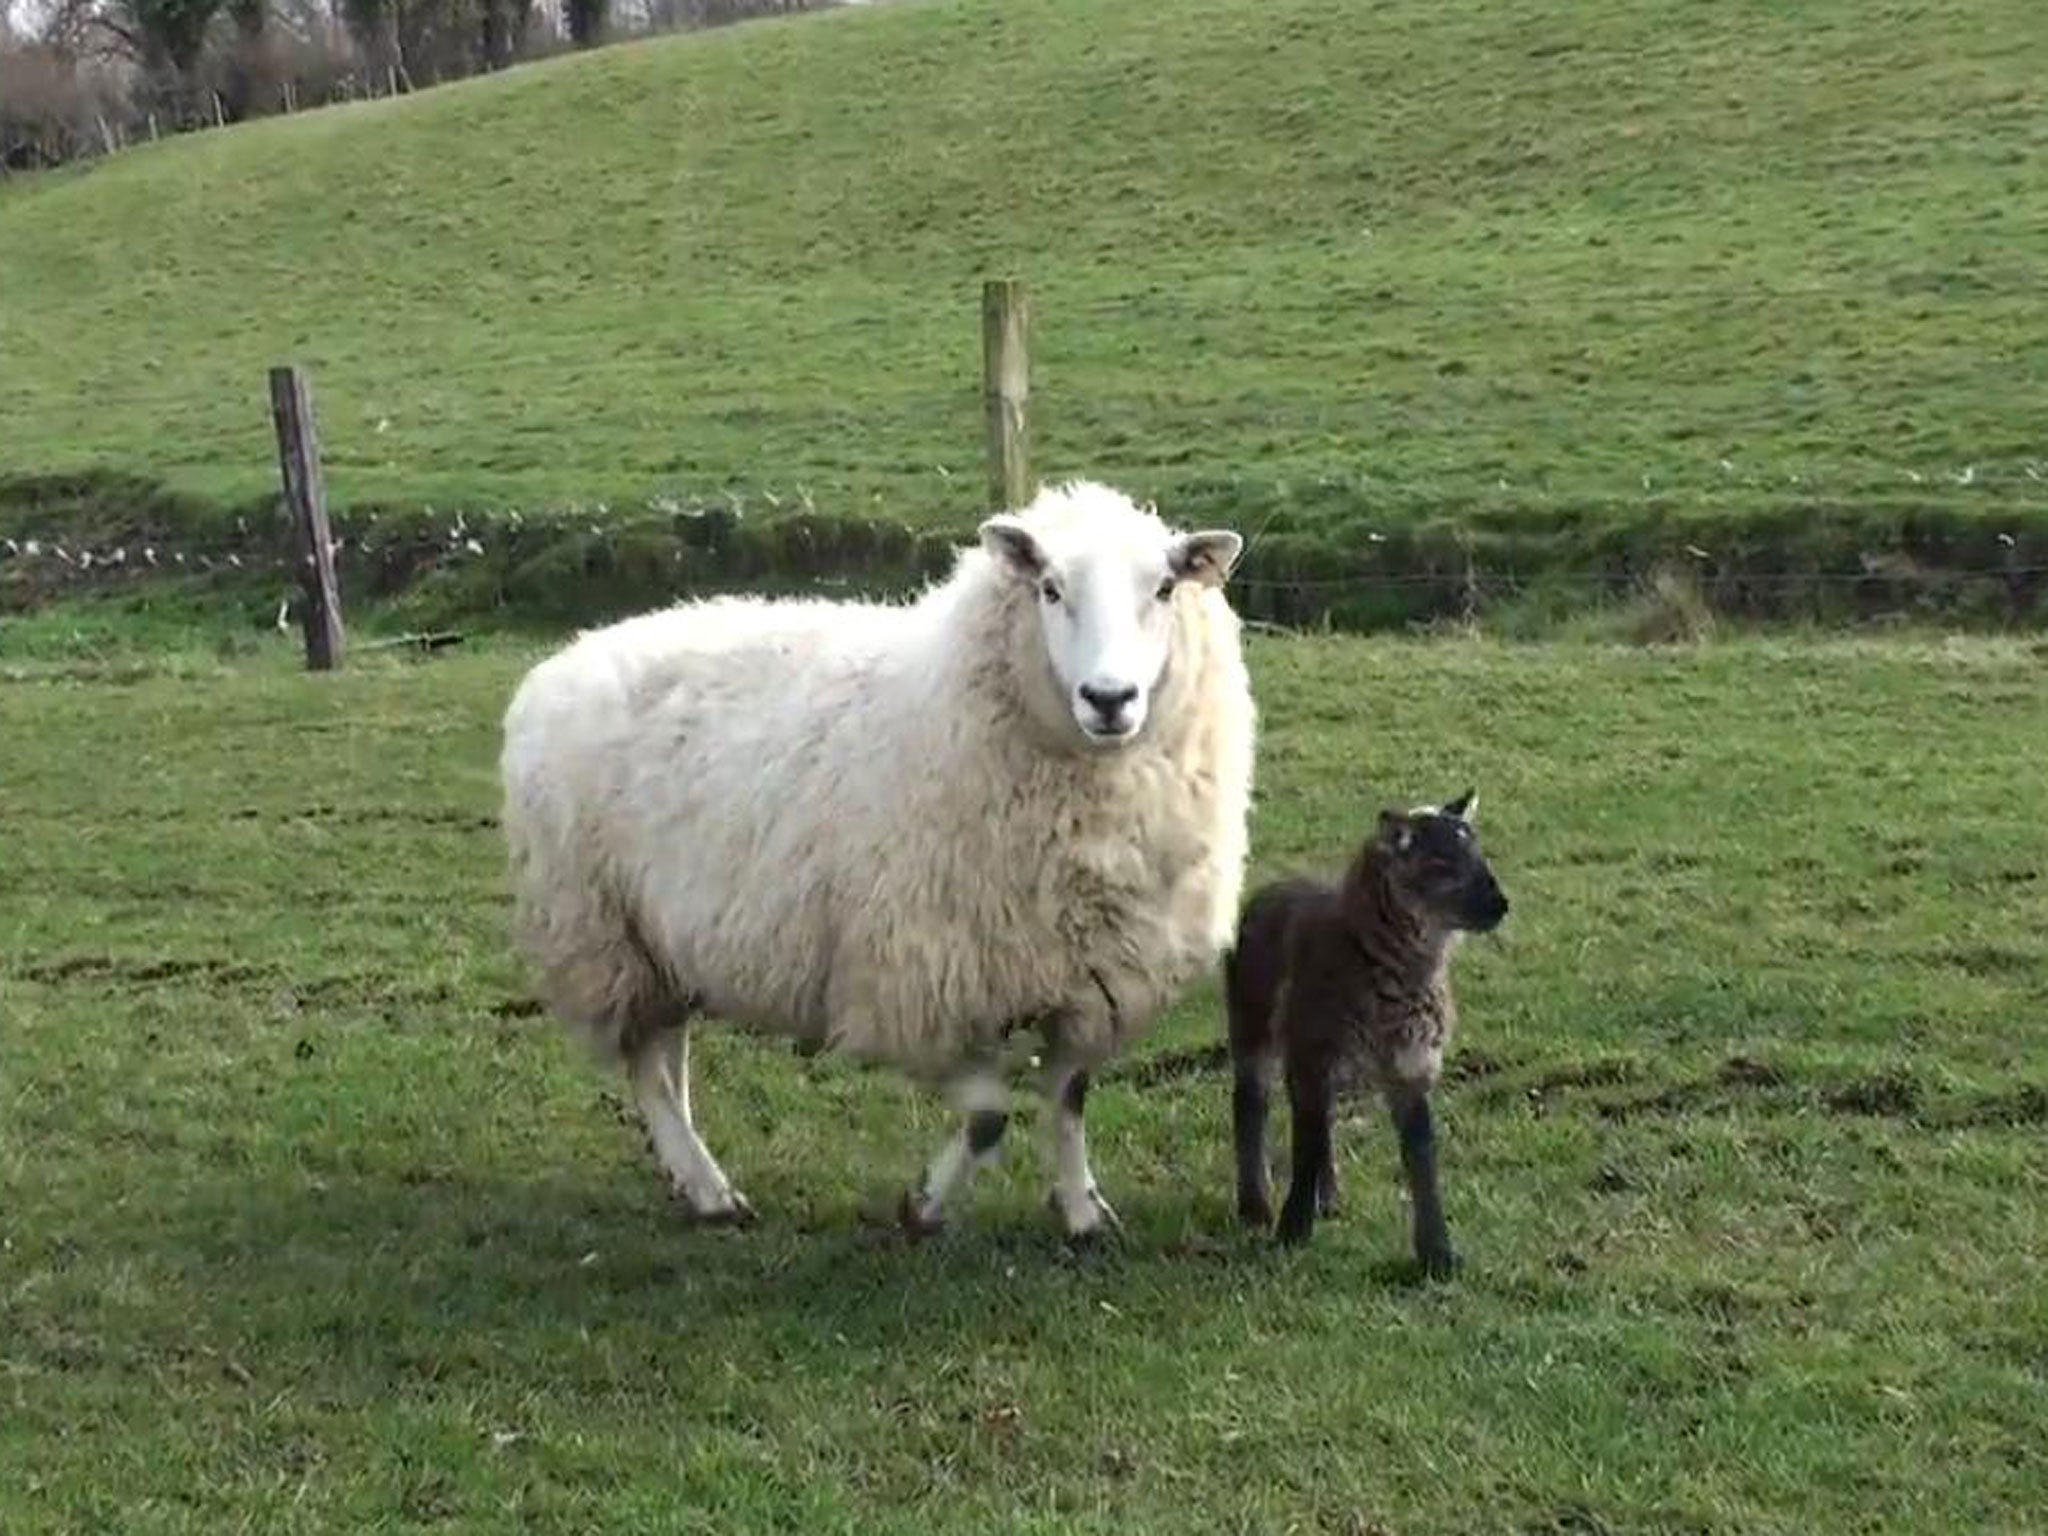 A rare goat-sheep hybrid has been born on an Irish farm, much to the surprise of a farmer who said the ‘geep’ is thriving since its birth